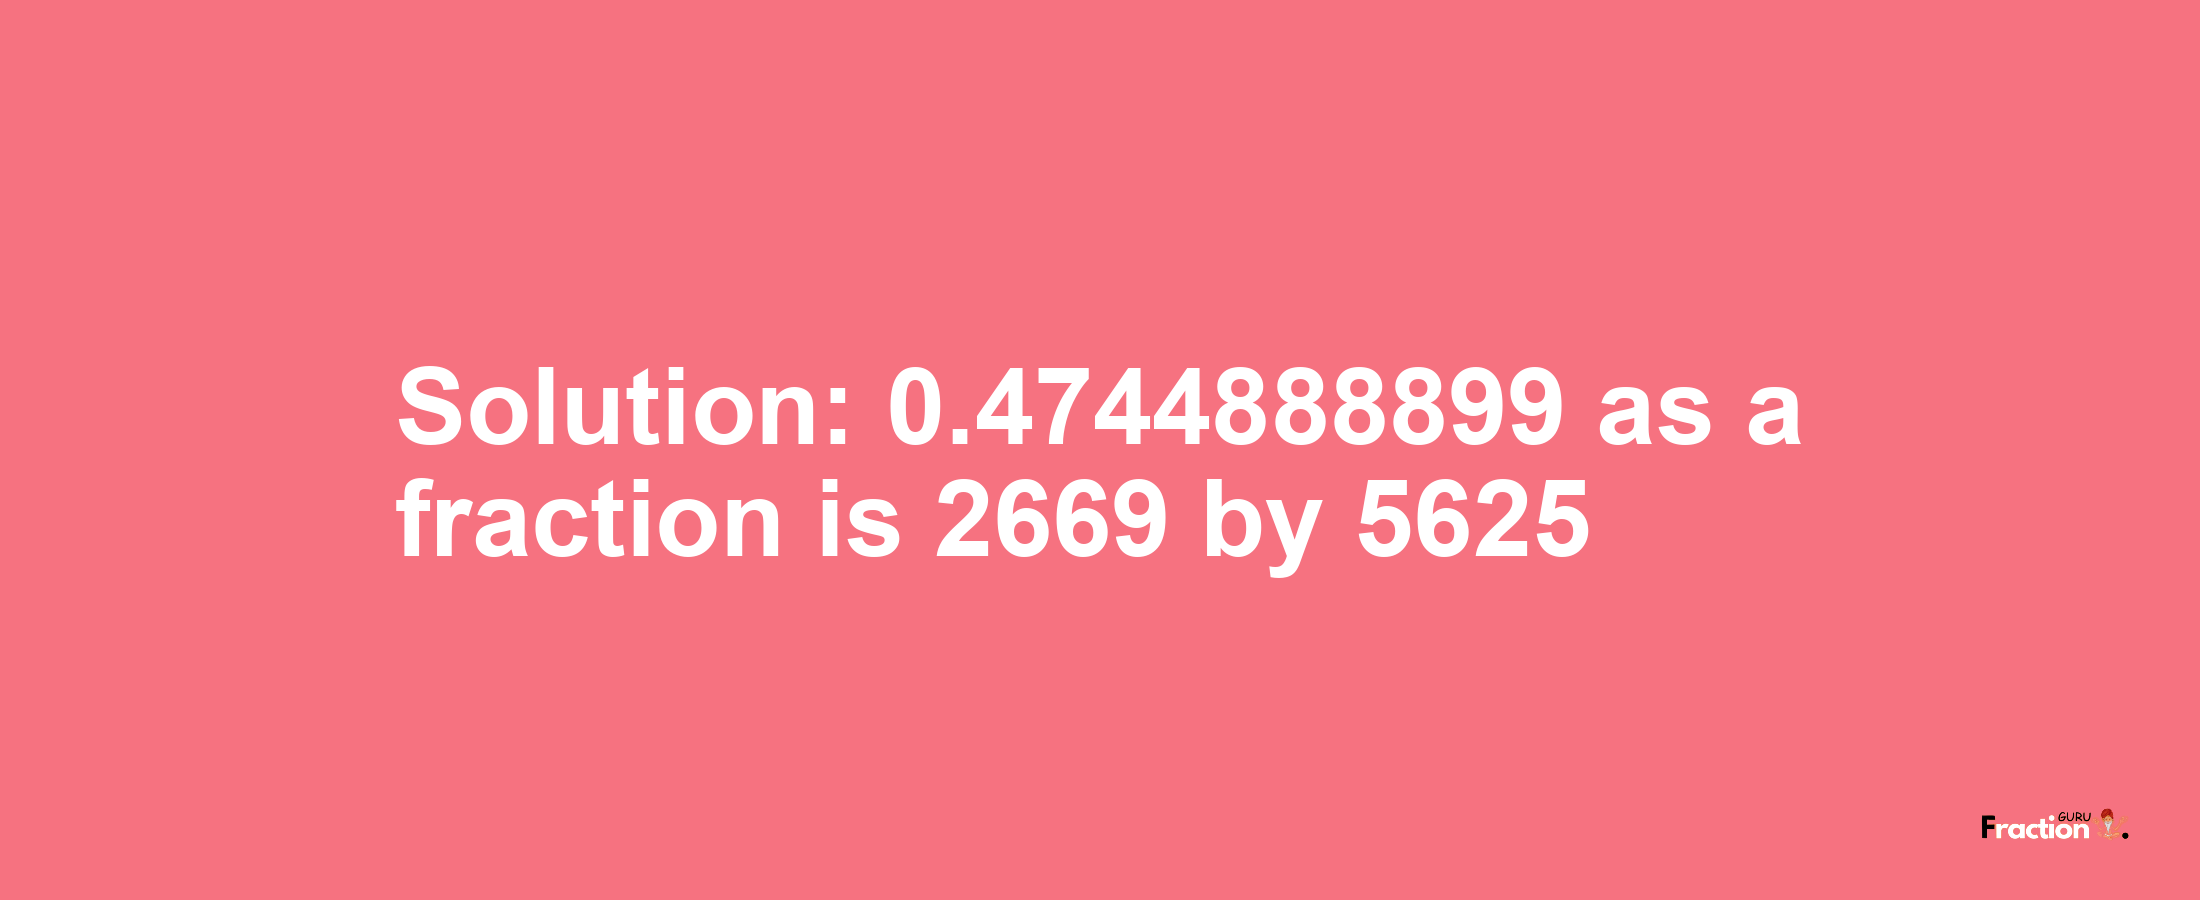 Solution:0.4744888899 as a fraction is 2669/5625